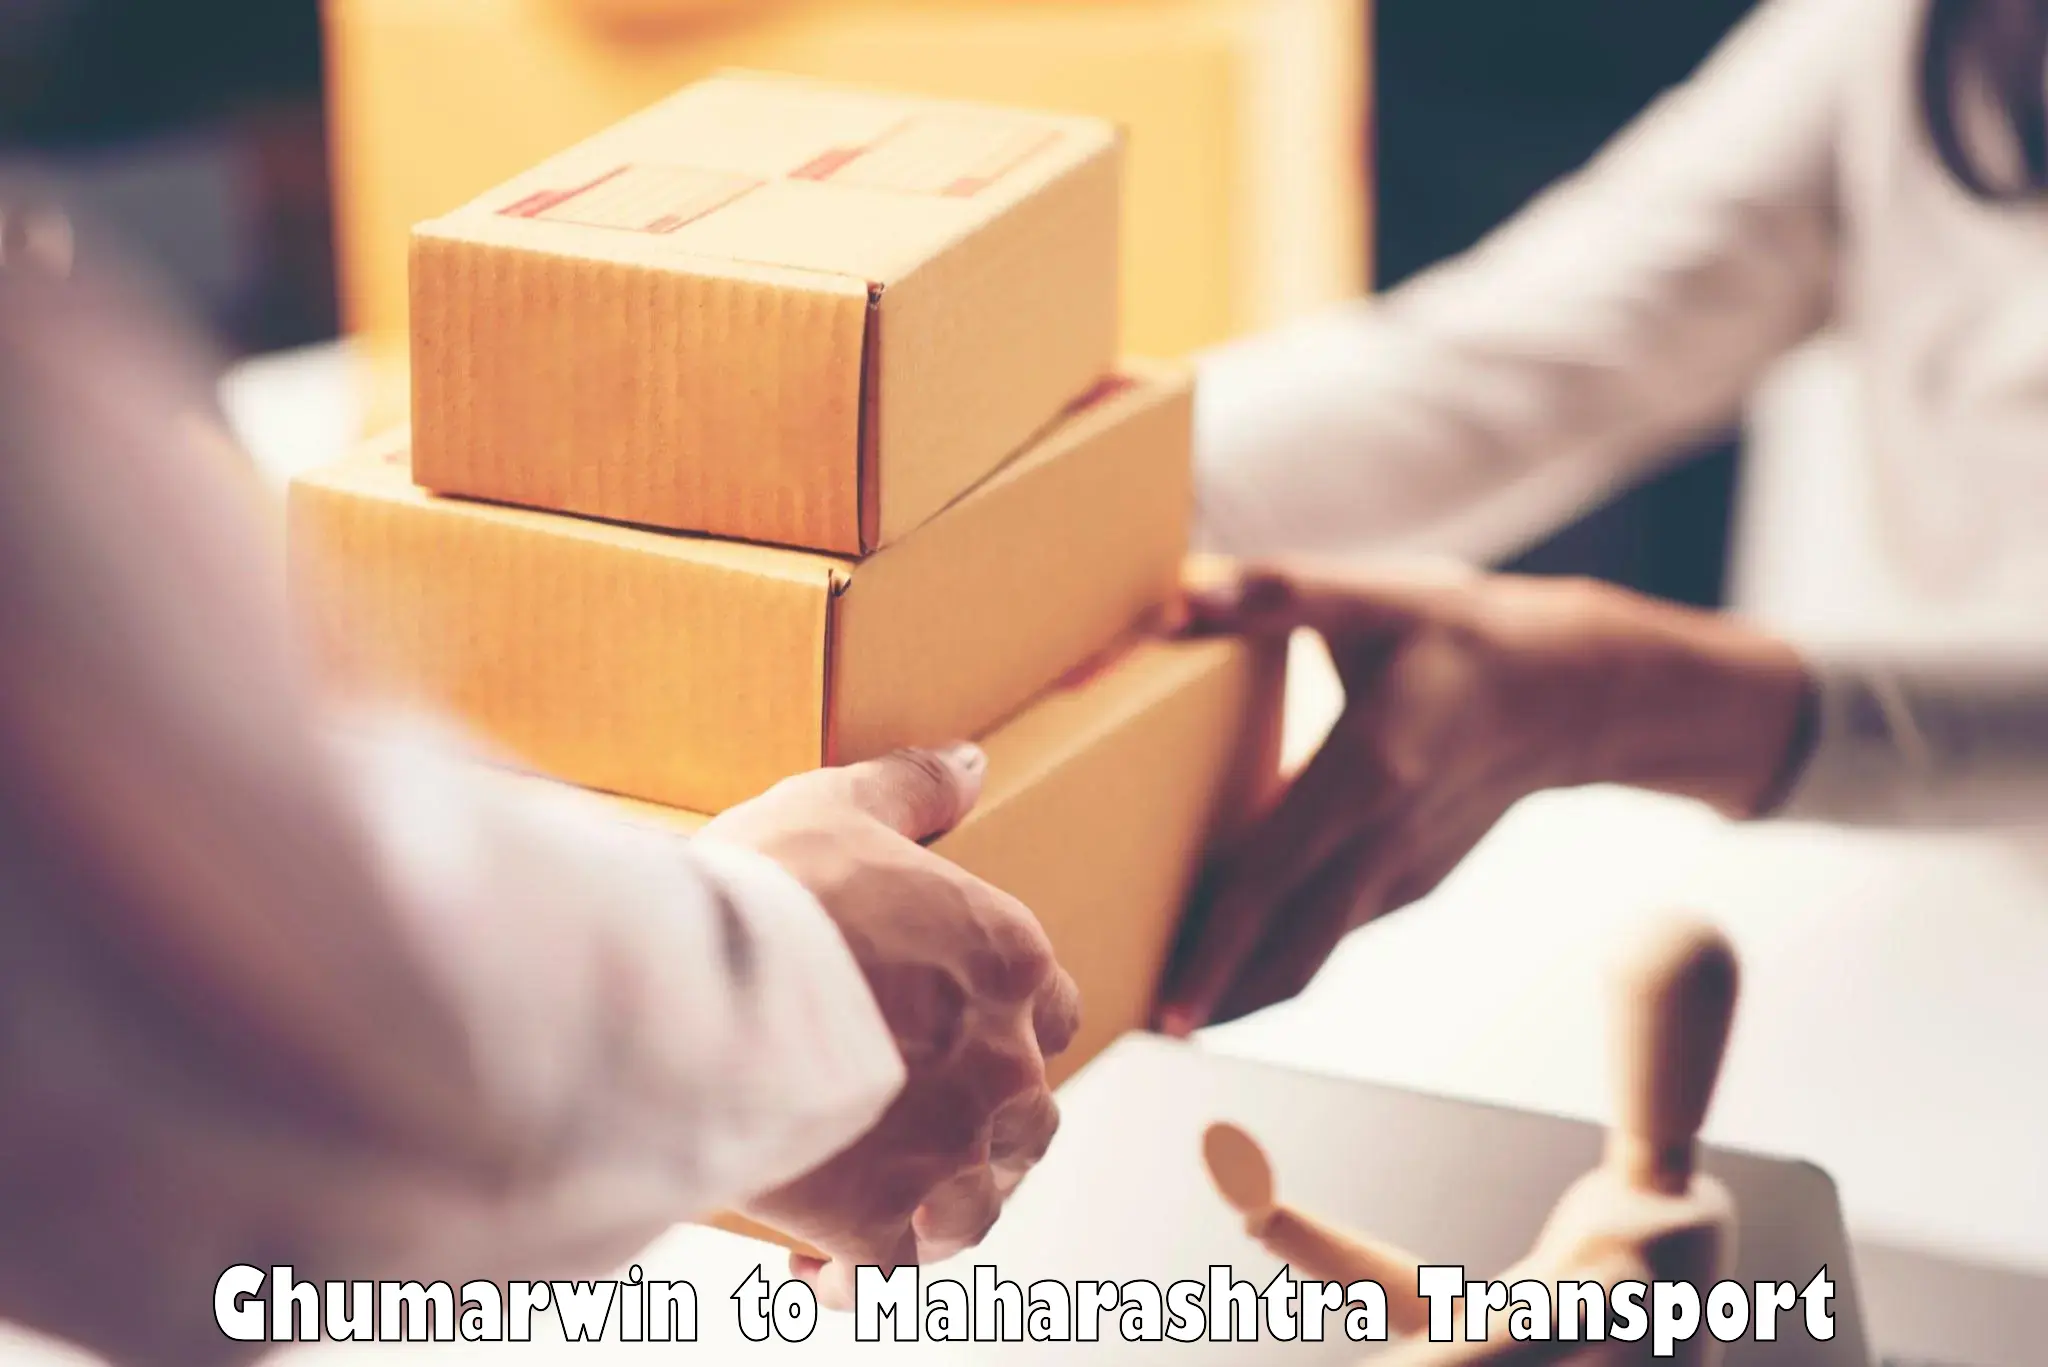 Truck transport companies in India in Ghumarwin to Pune